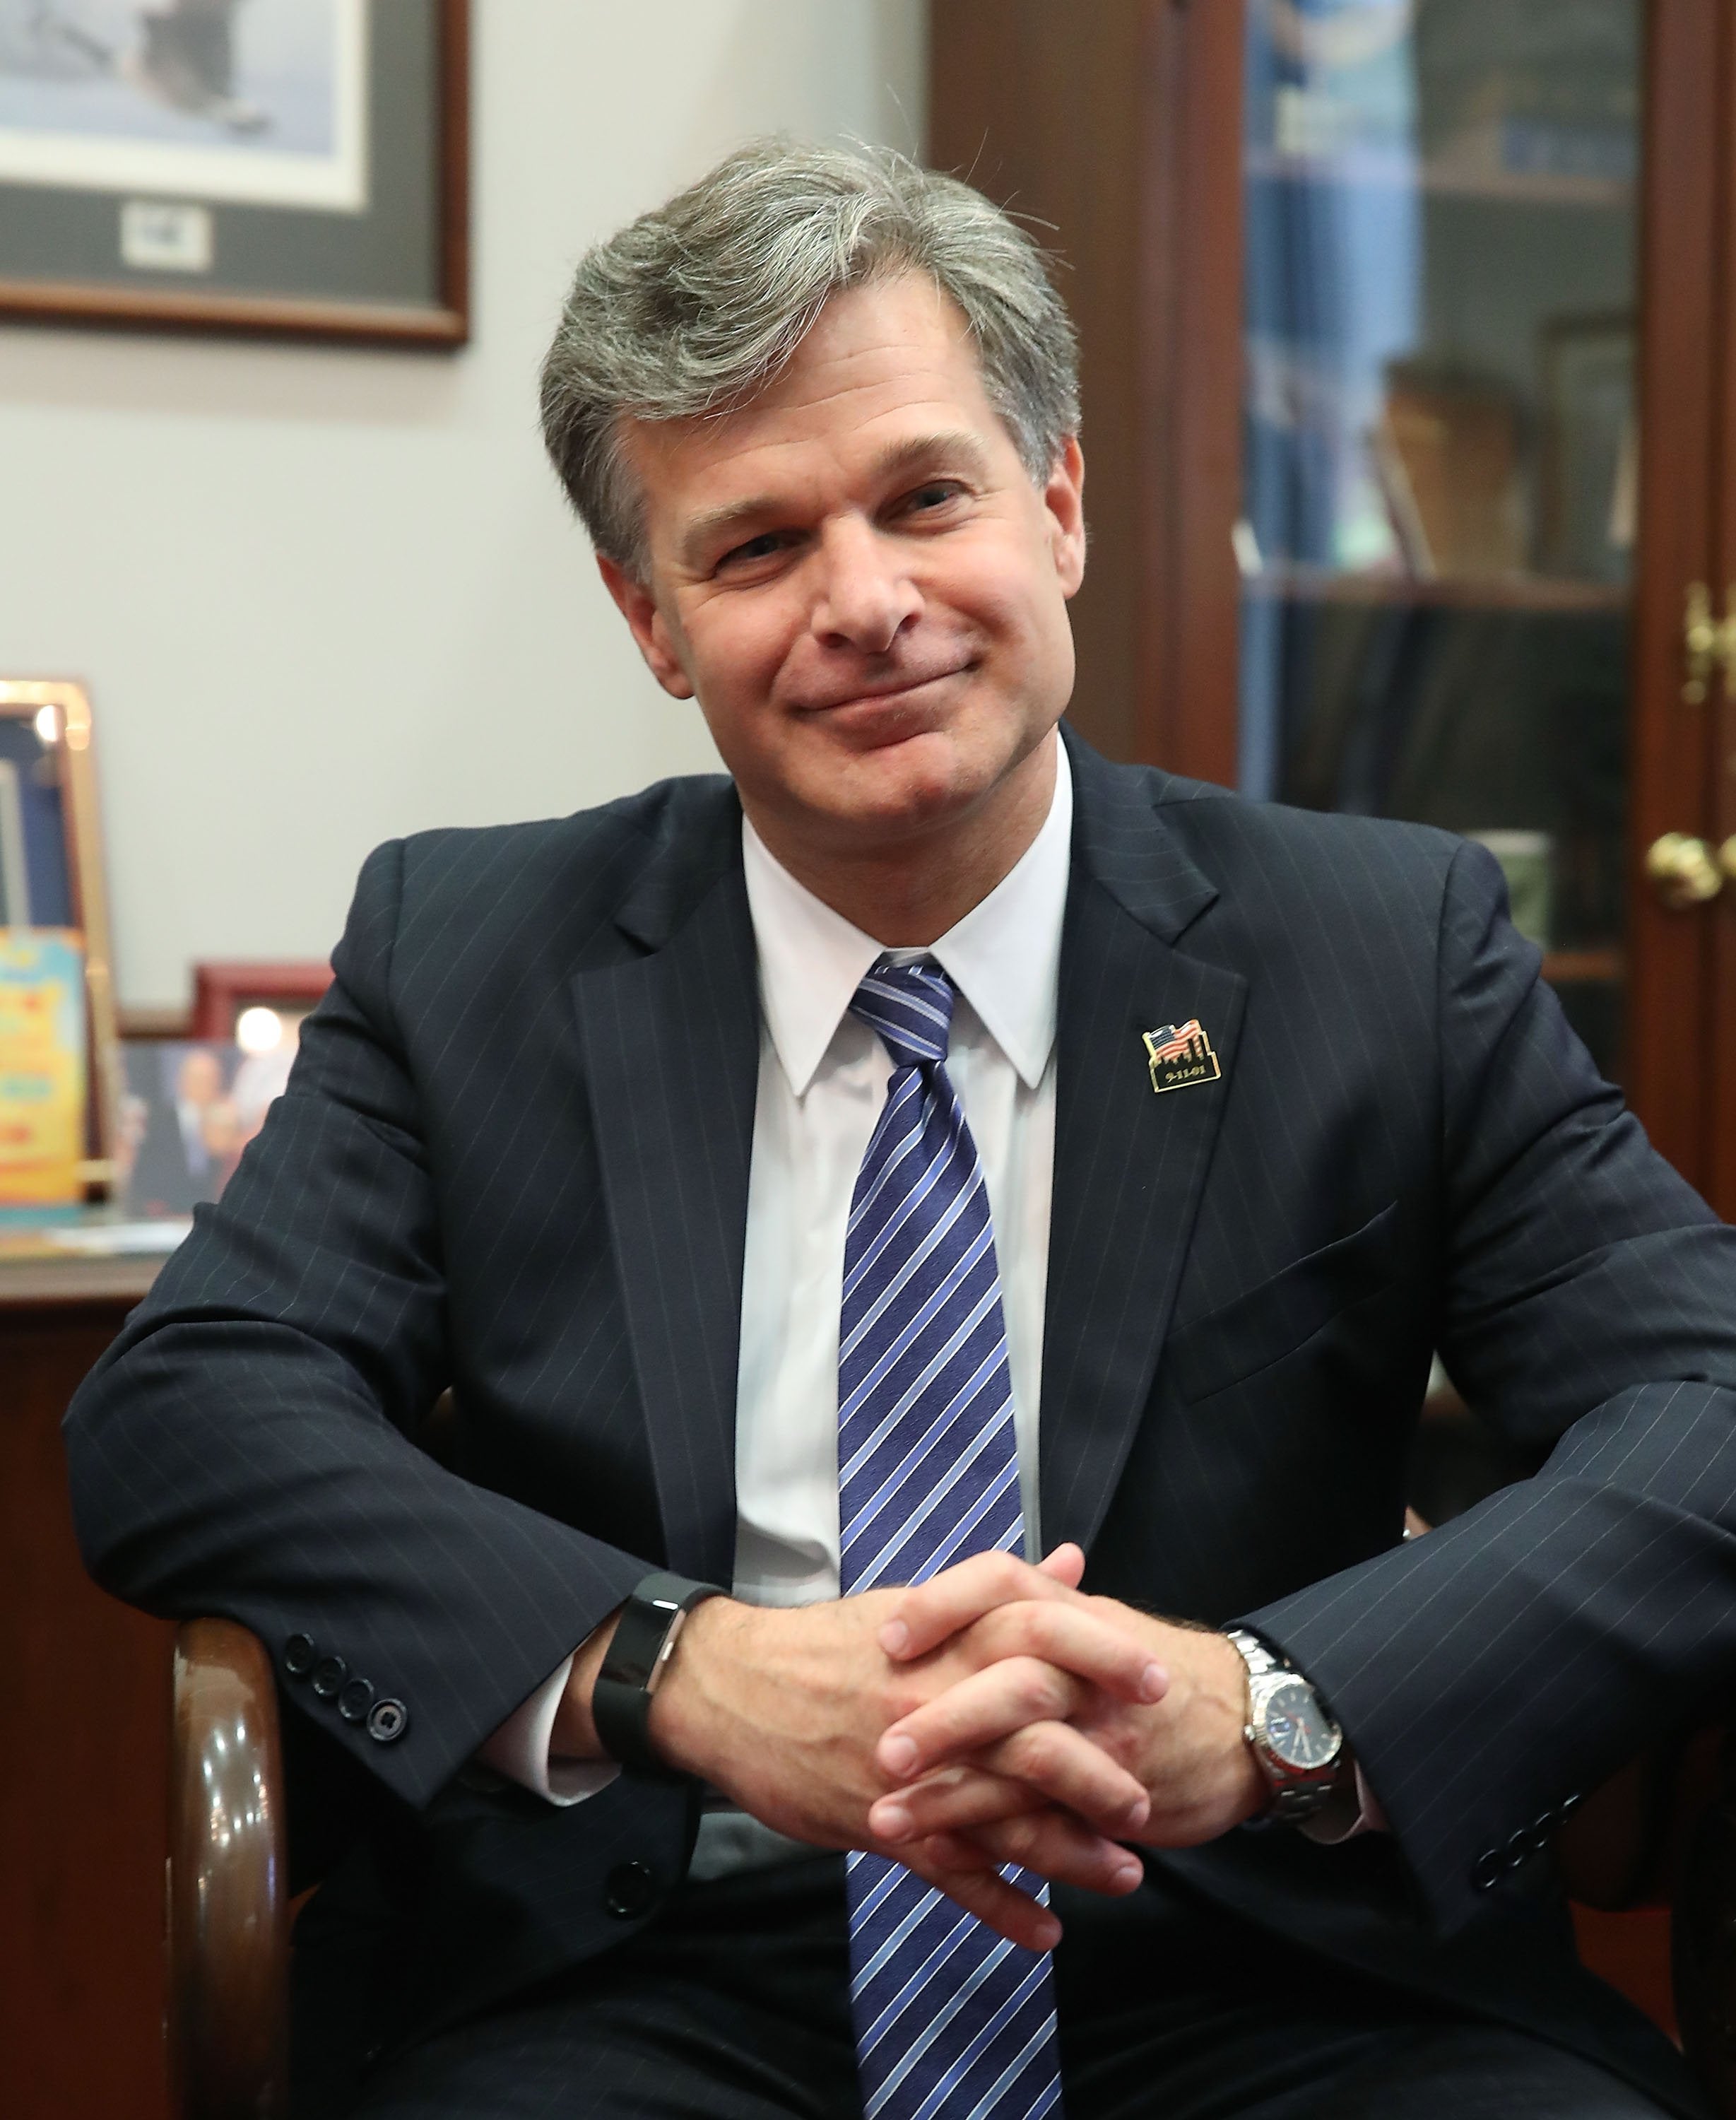 Watch FBI Director Nominee Christopher Wray Field Questions At Senate Hearing
